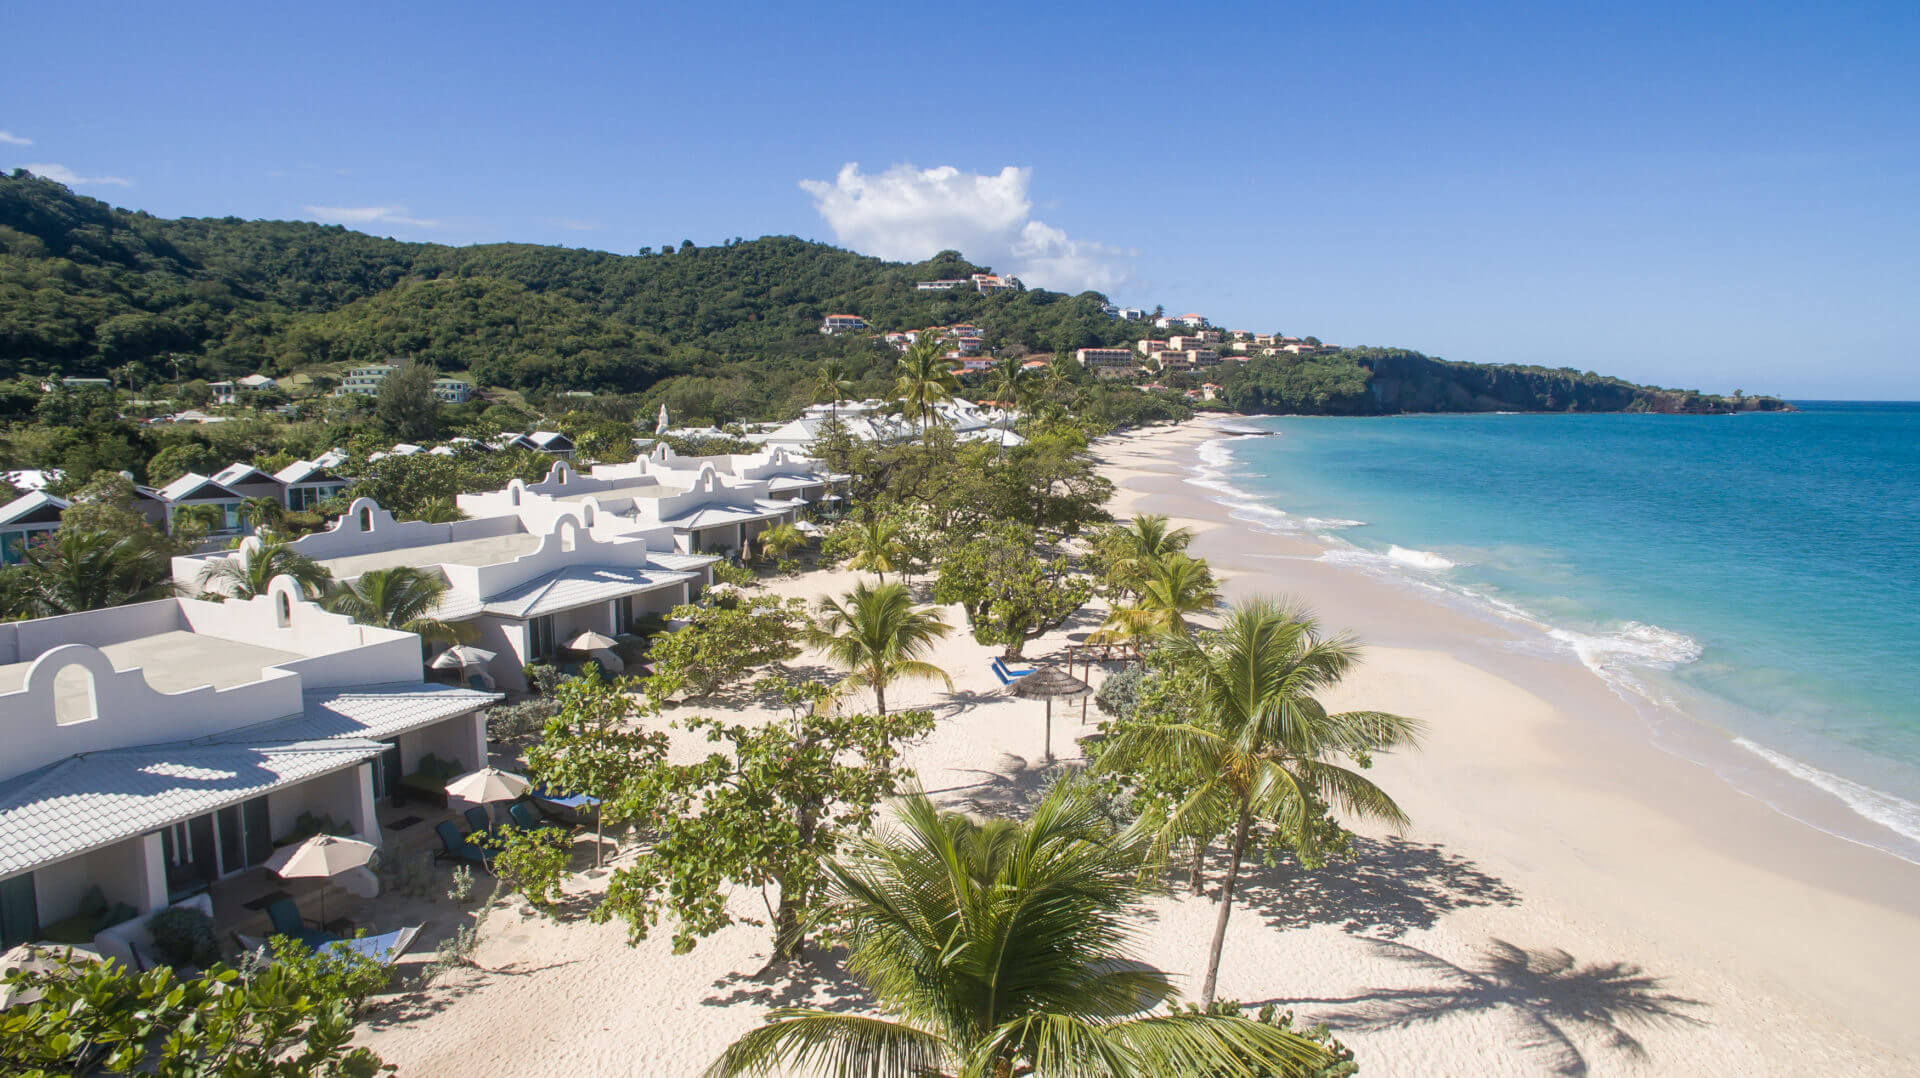 LUXURIA LIFESTYLE'S DANIELLE JACOBSON REVIEWS THE STUNNING Spice Island Beach Resort IN Grenada